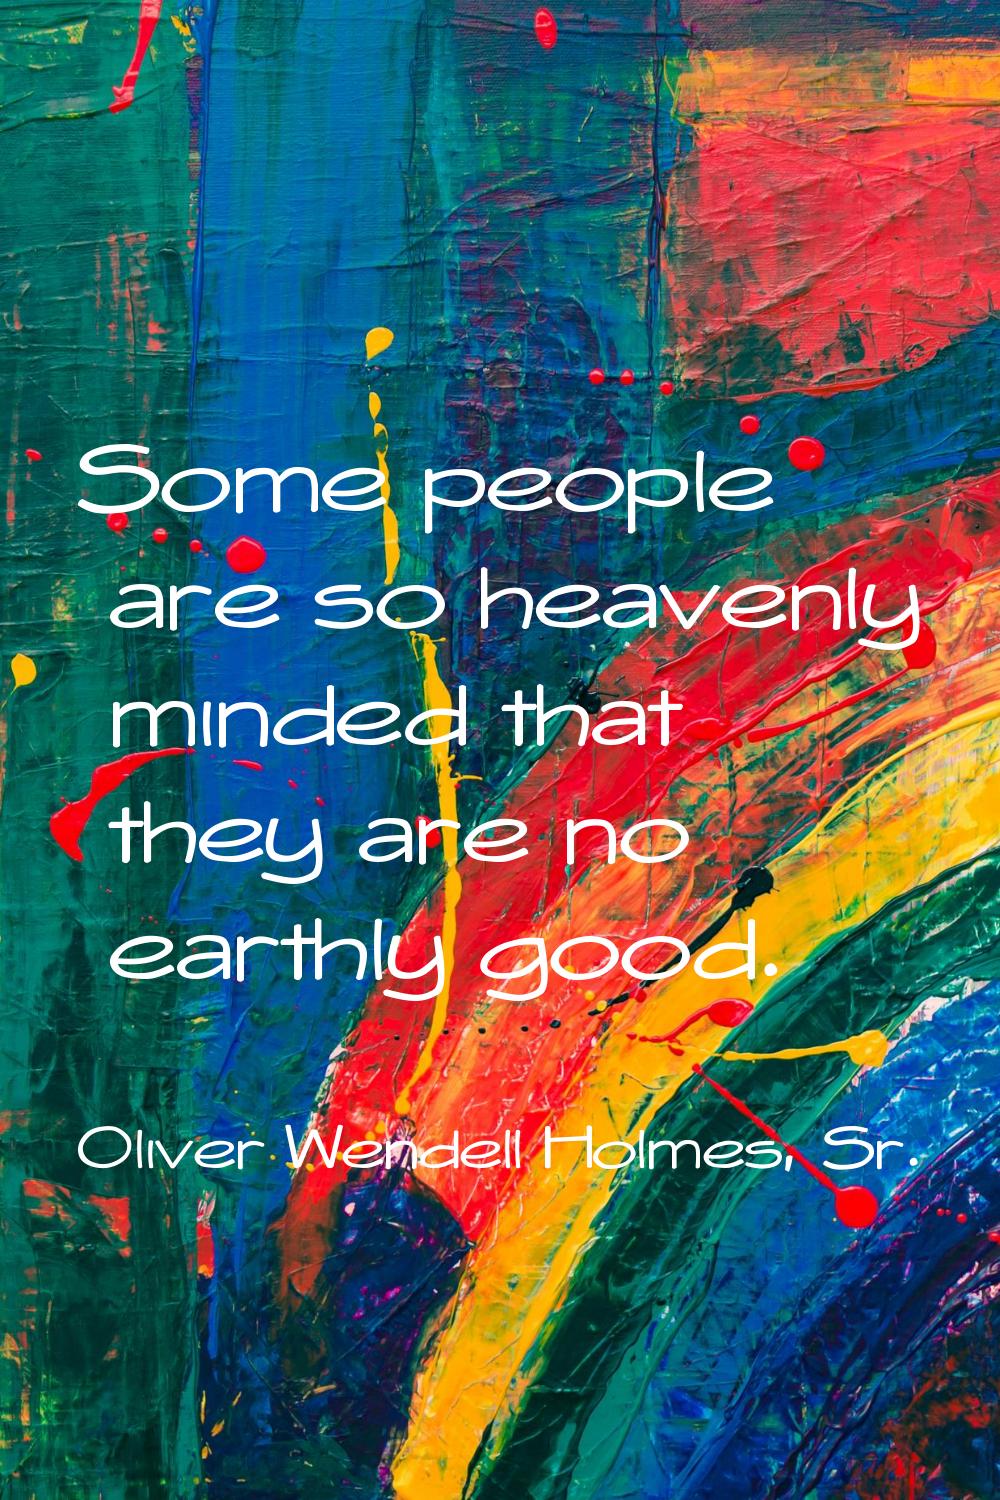 Some people are so heavenly minded that they are no earthly good.